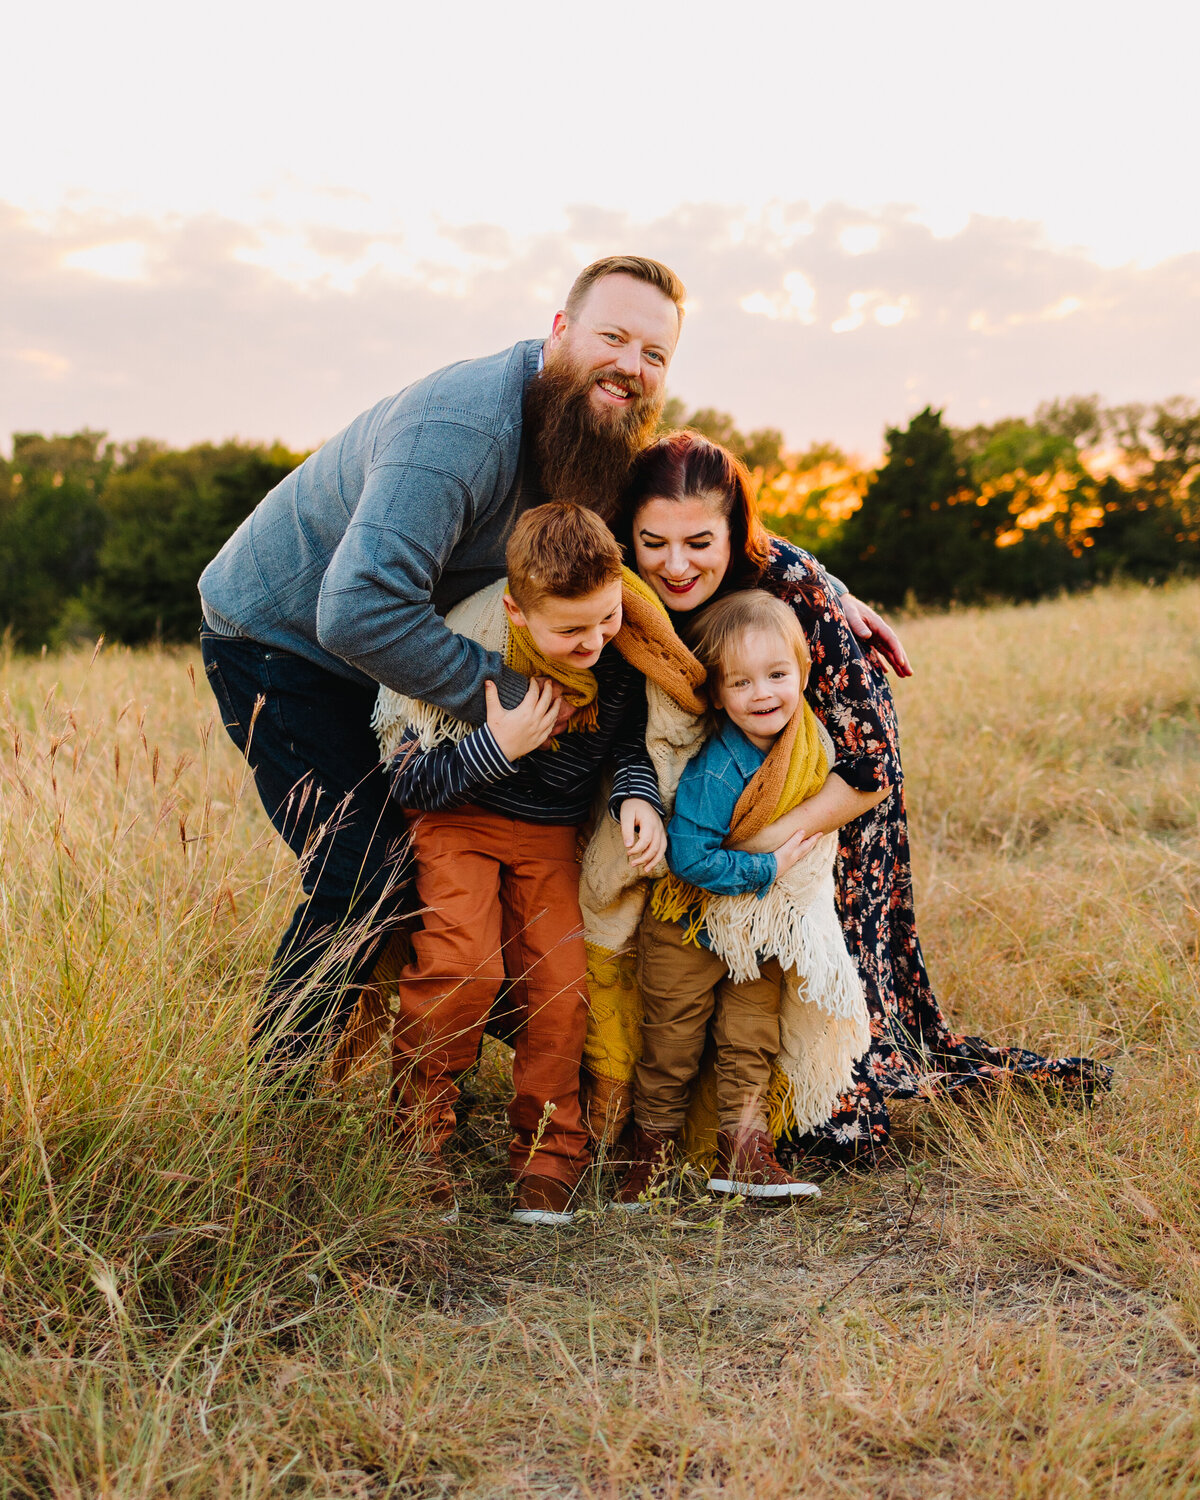 A family poses for a professional mini session in the fall. They are looking at the sunset and behind them are some trees. The dad is wearing a blue outfit and the mom is wearing a dress with flowers, and the kids have a scarf around their necks.